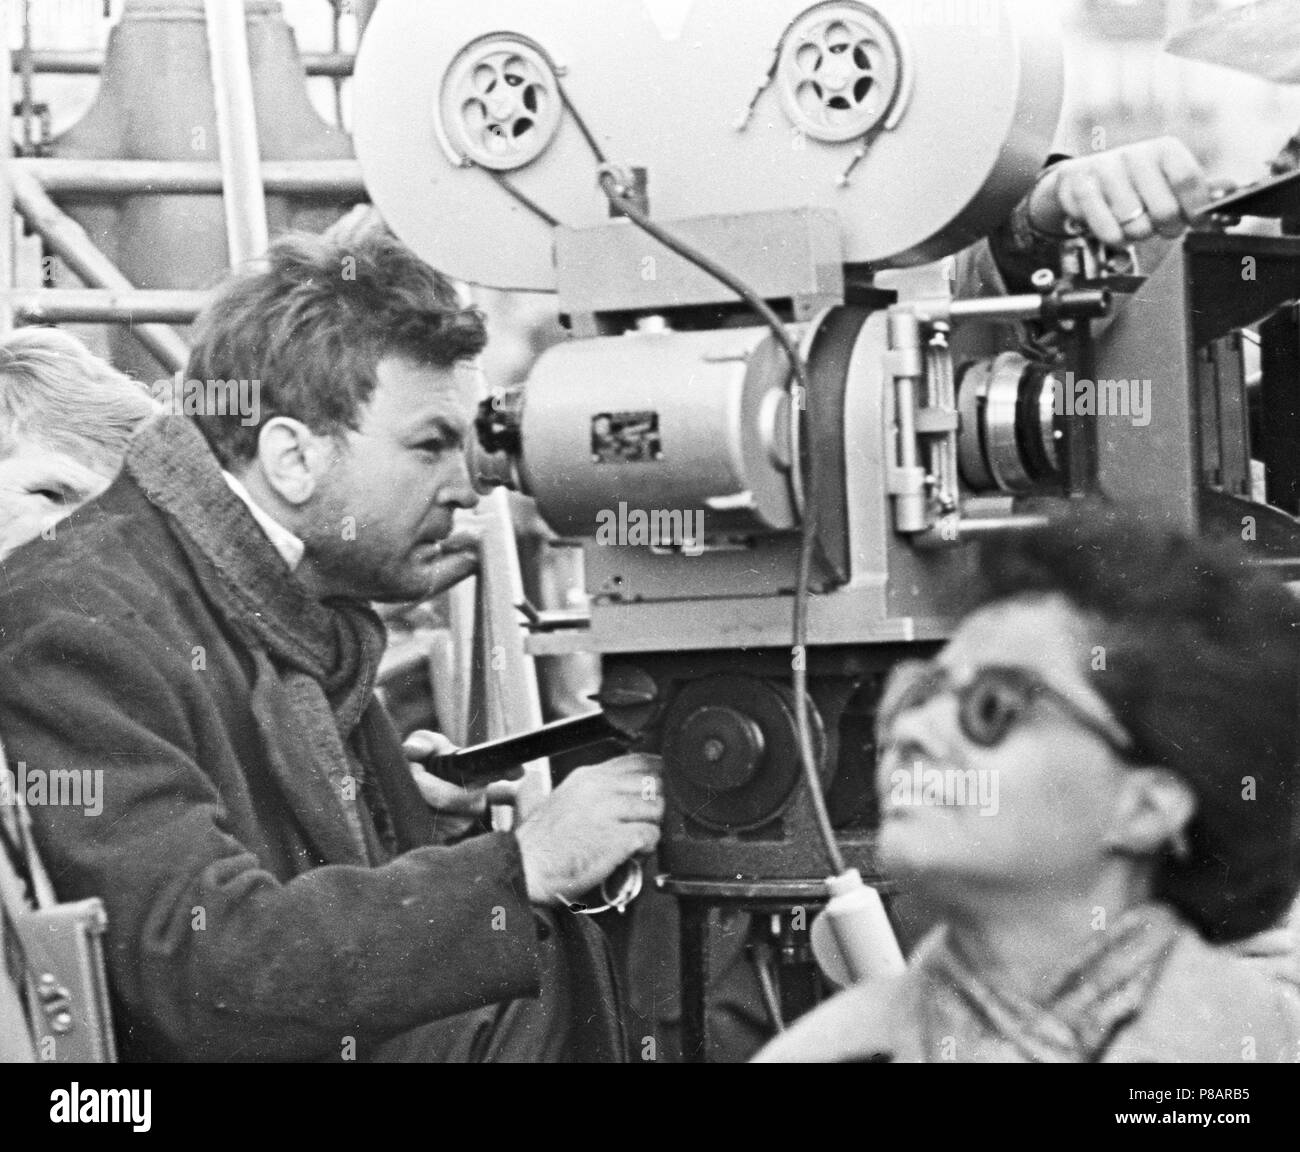 Film director Sergei Bondarchuk at the shooting of 'War and Peace'. Museum: State Central A. Bakhrushin Theatre Museum, Moscow. Stock Photo